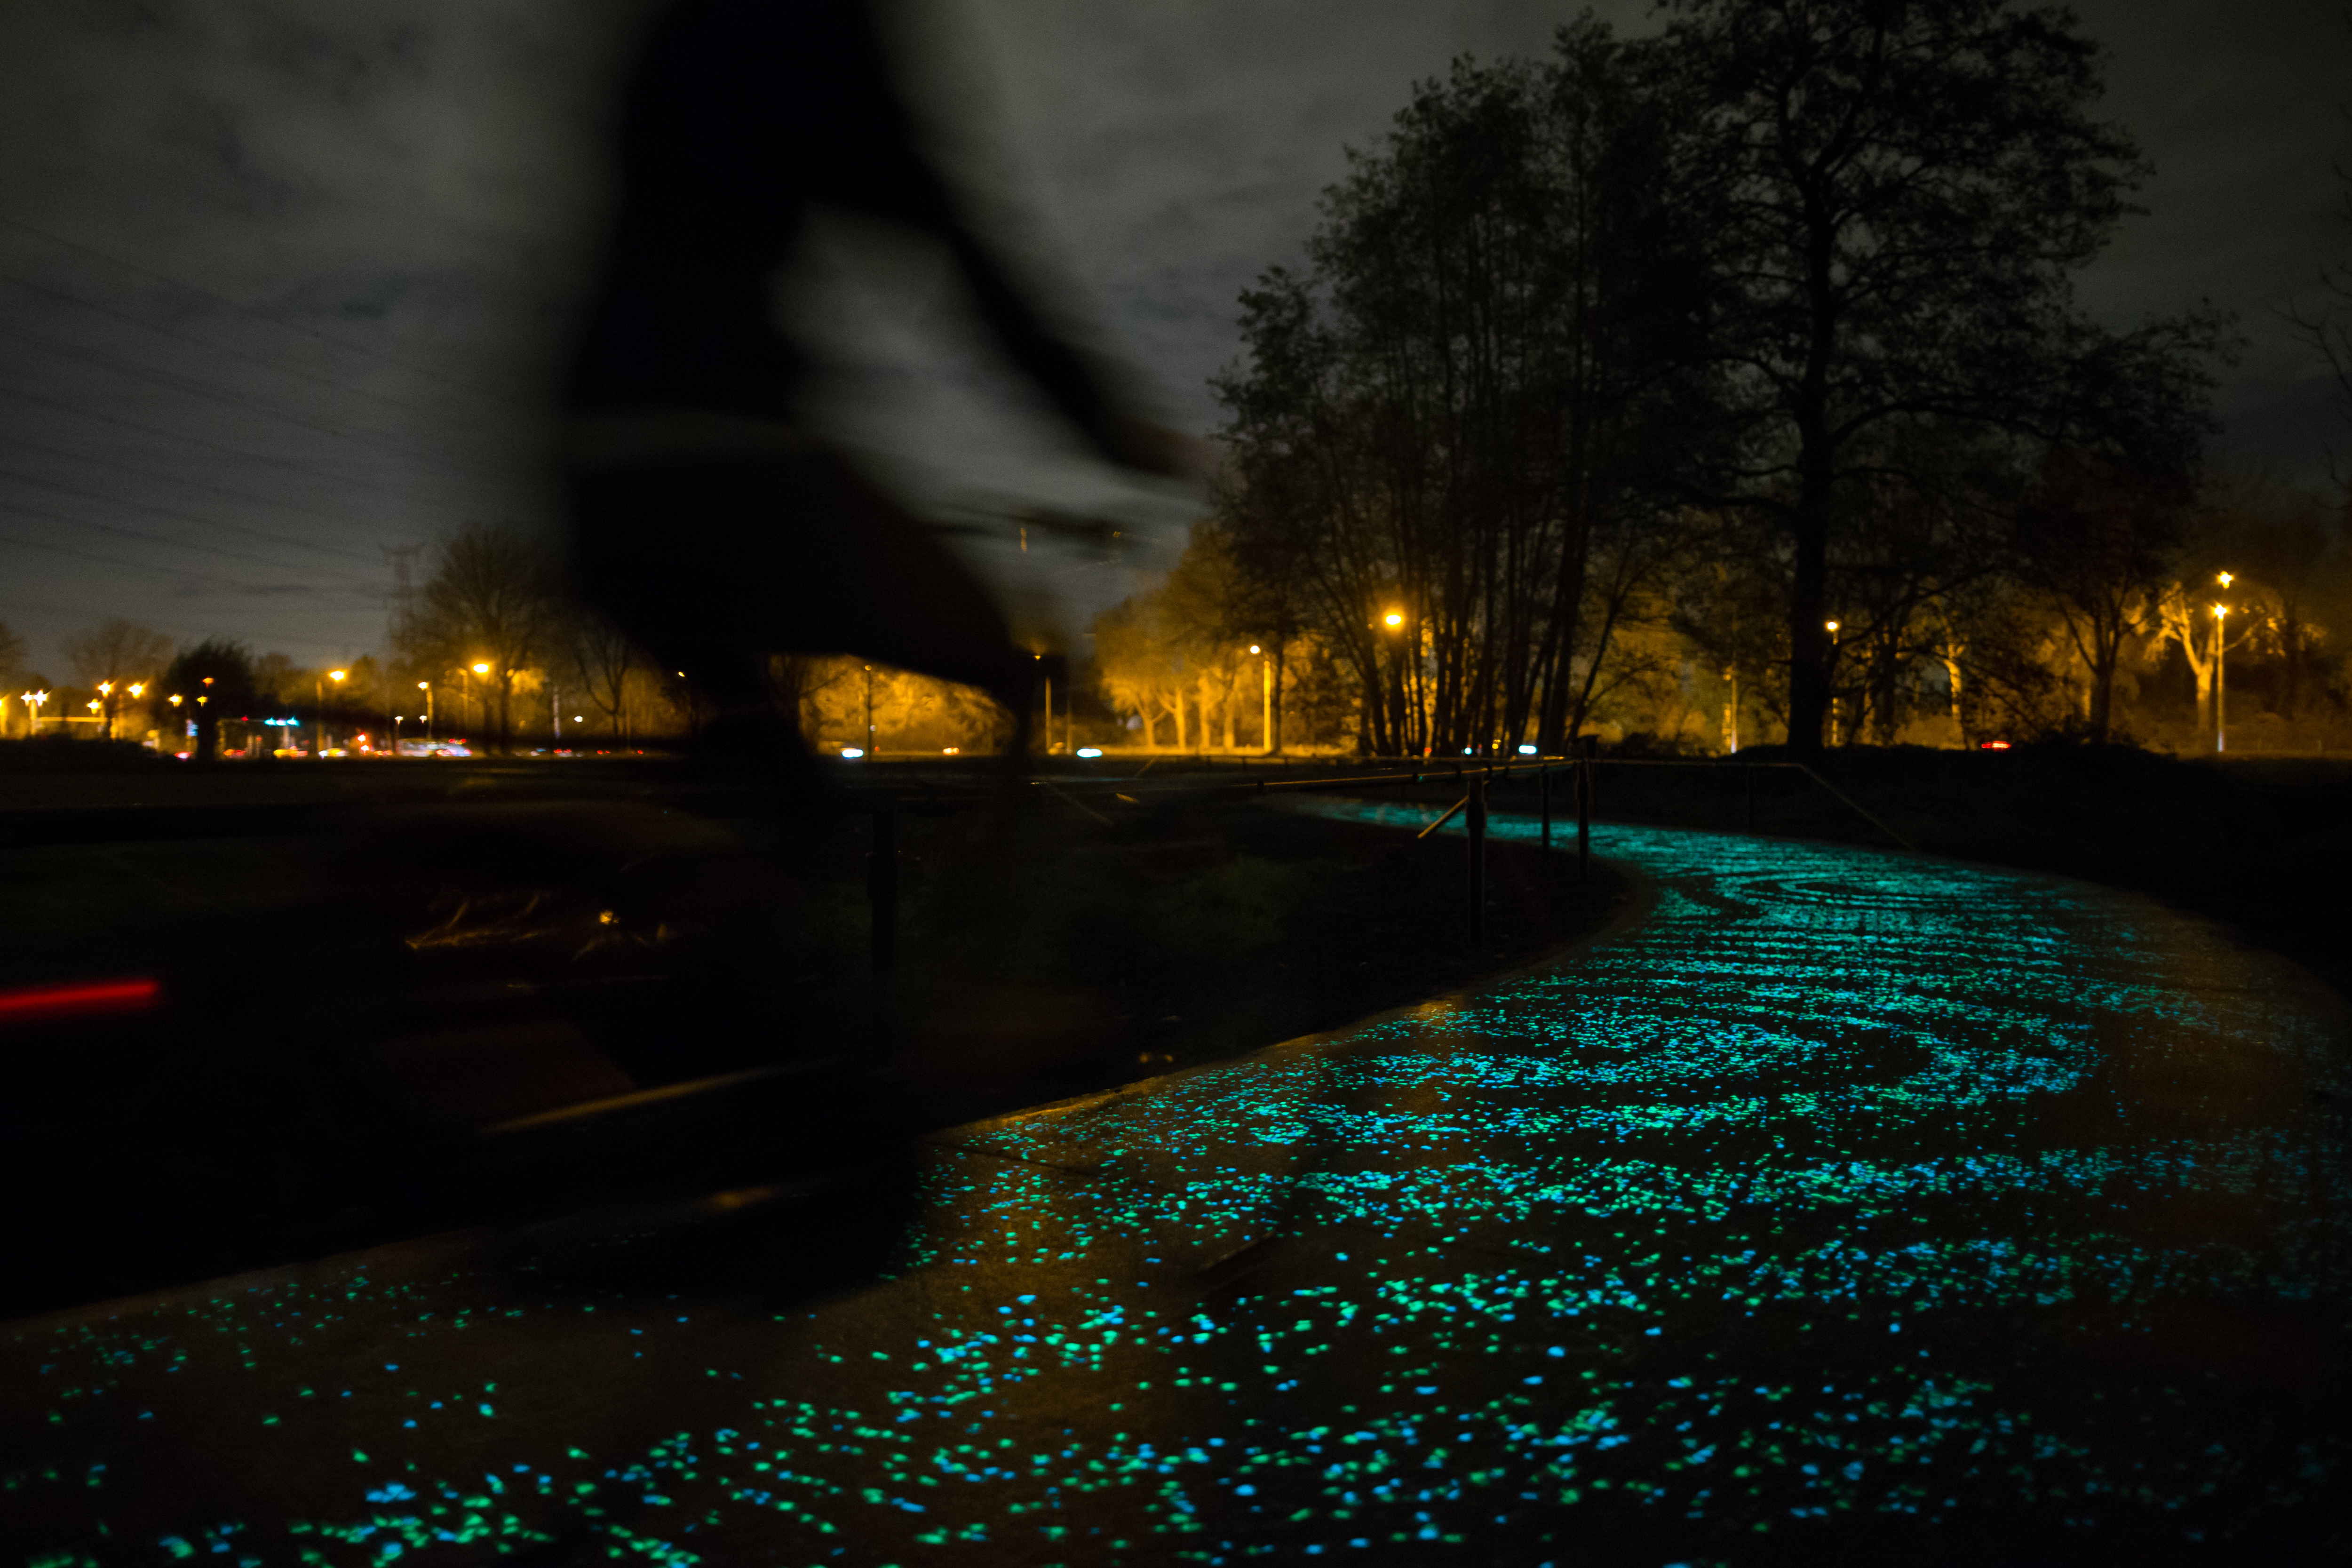 Winner of Best Future Concept, designer Daan Roosegarde created a luminated cycle path